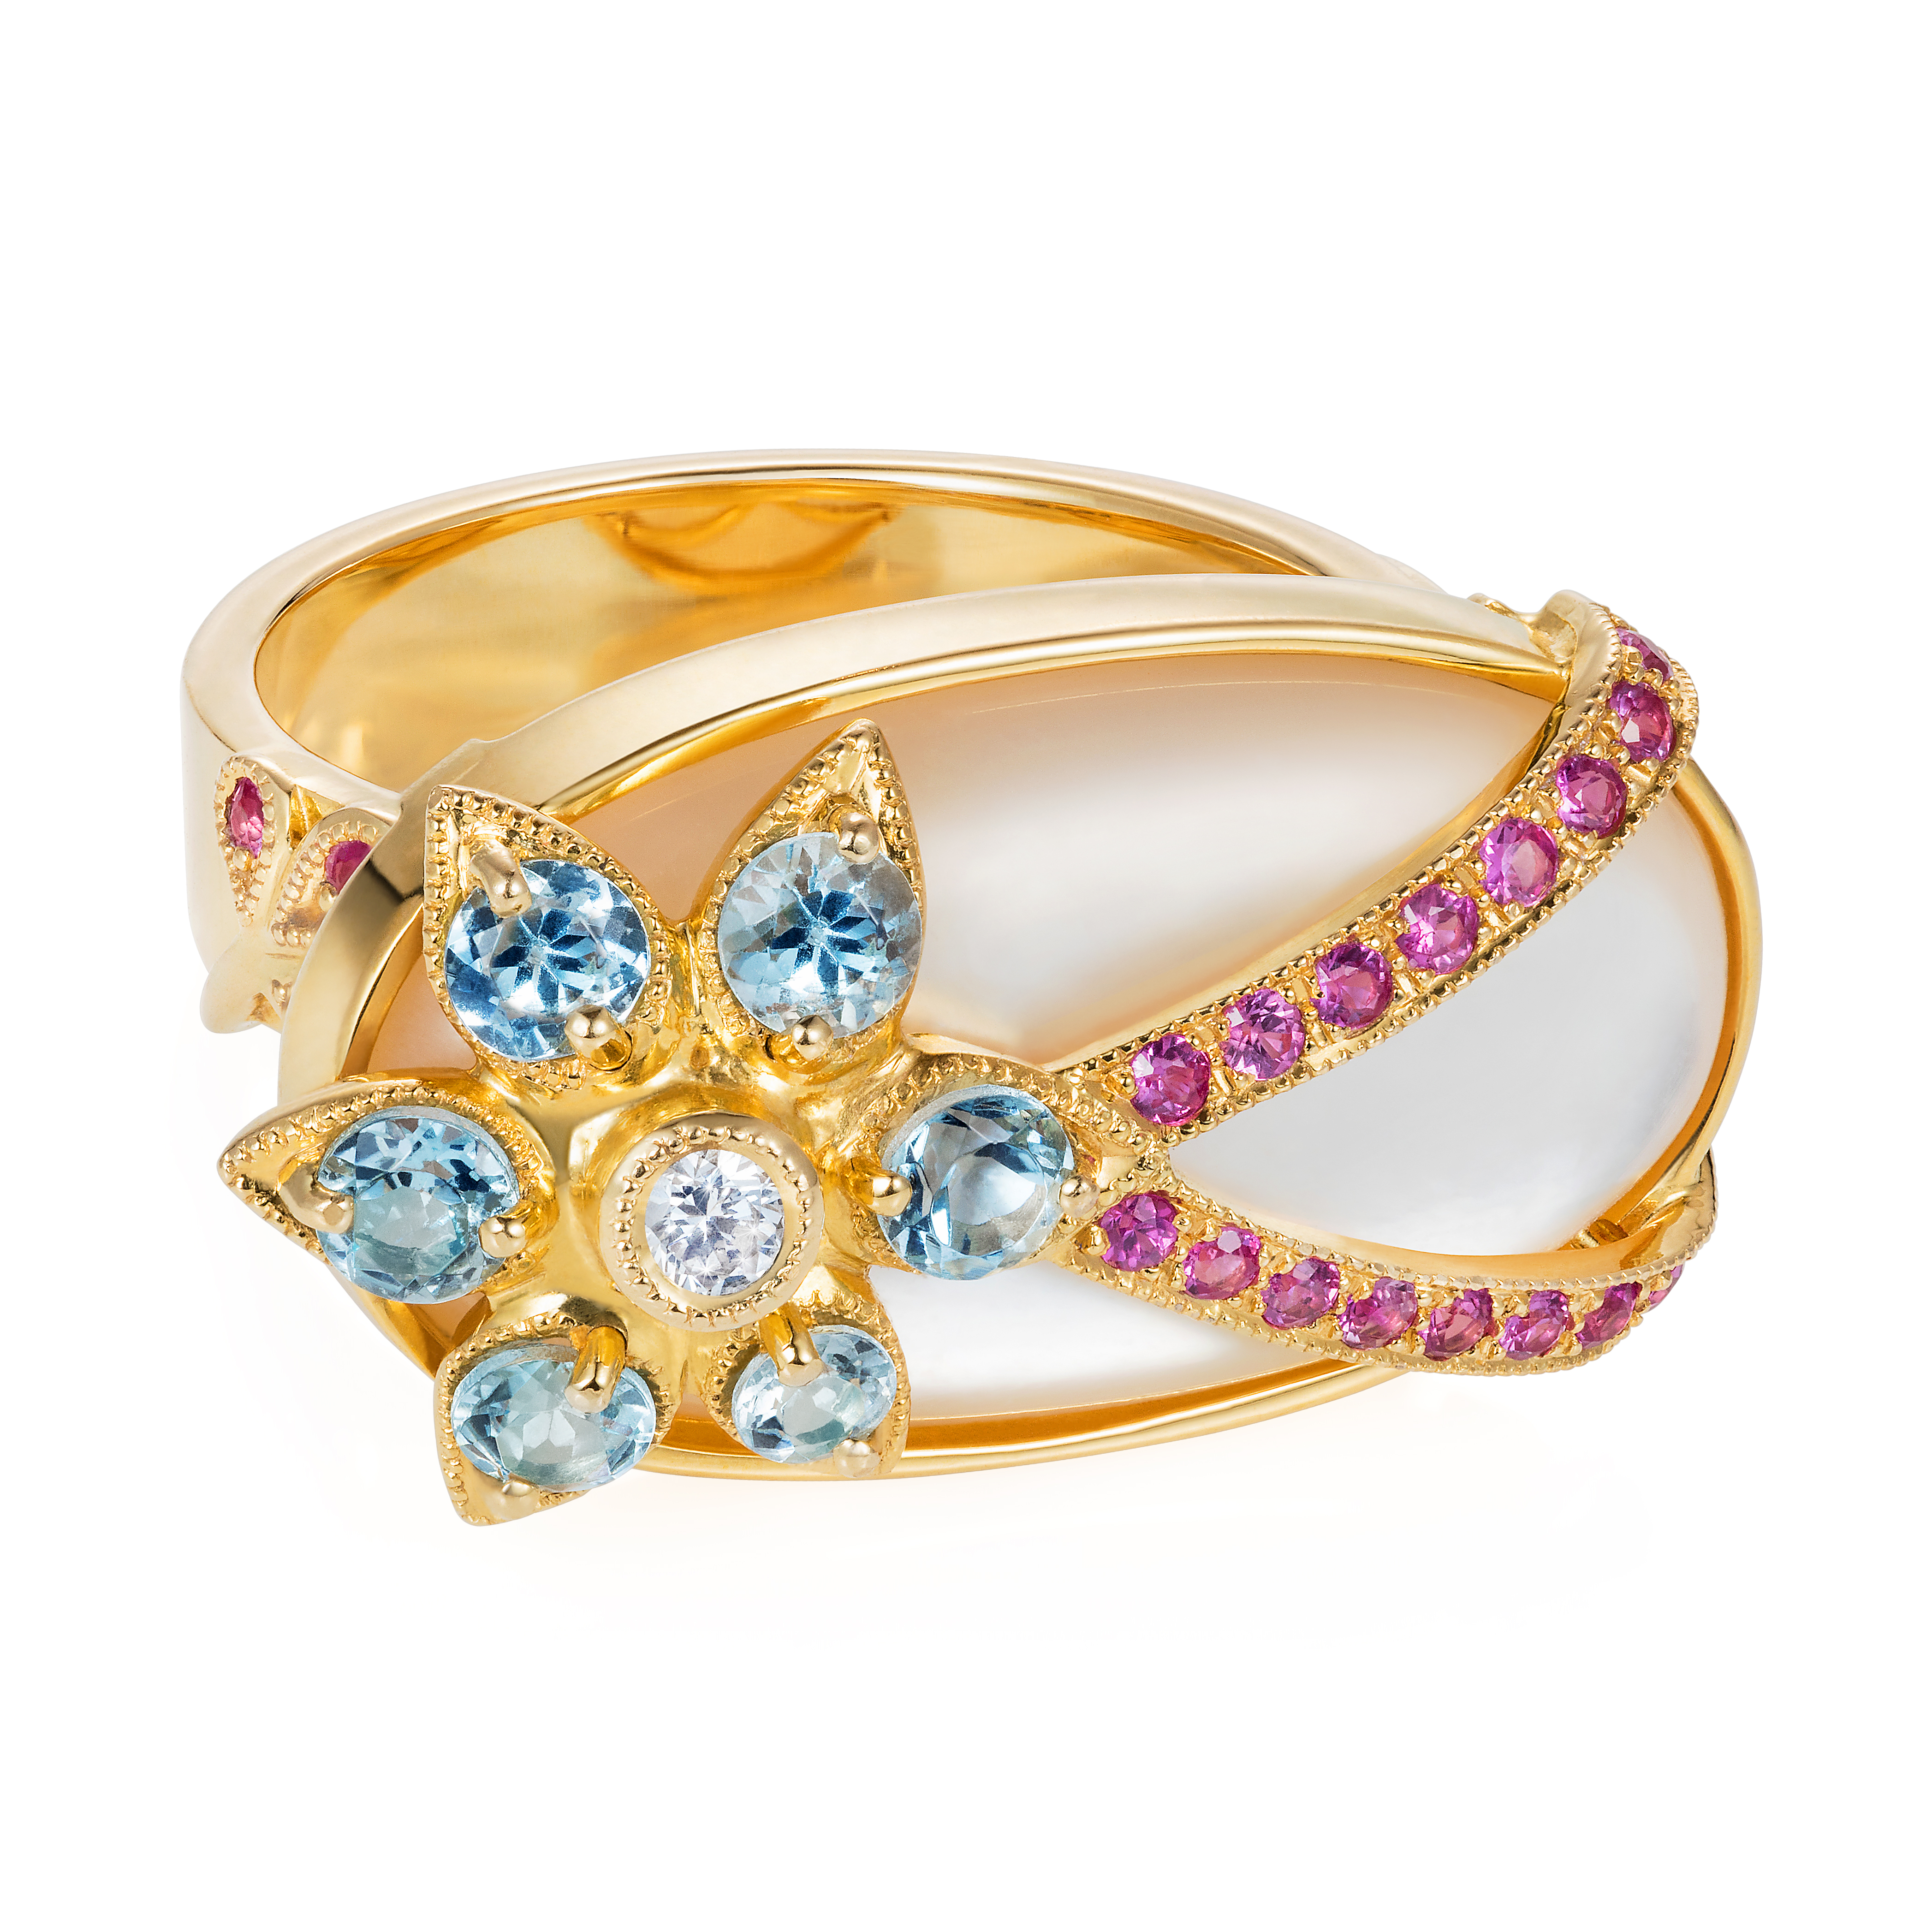 Shimmer Ring, Long Oval – Aquamarines, Hot Pink Sapphires And Diamonds Over A Mother-of-pearl Cabochon 18k Gold